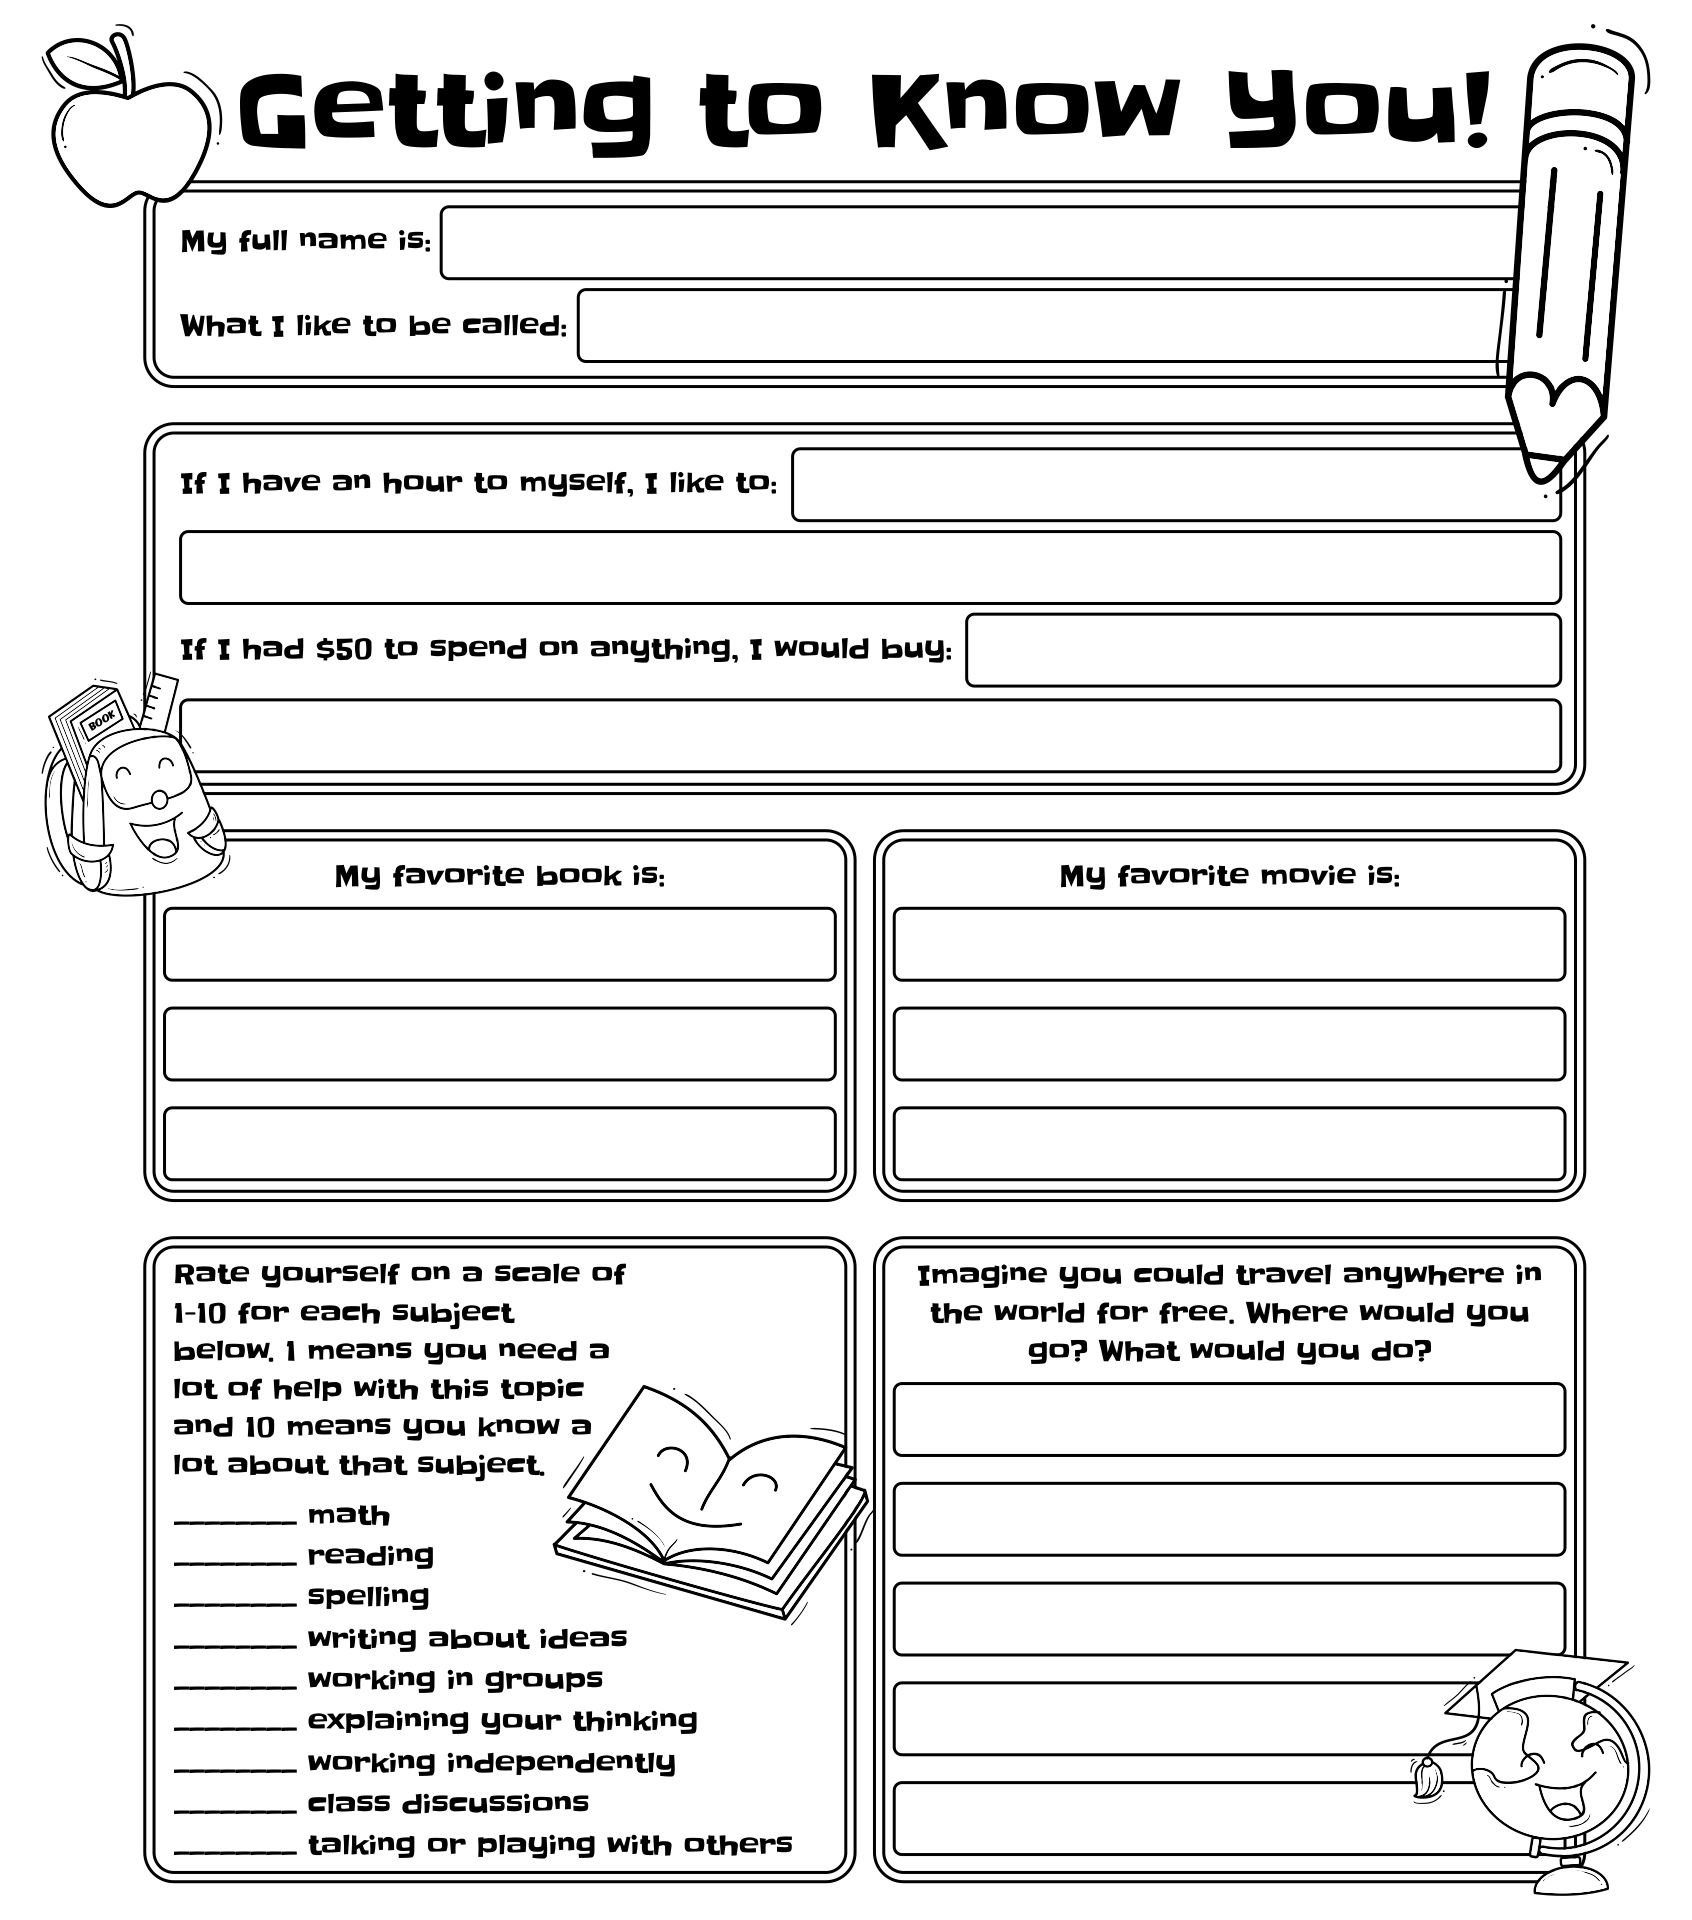 6 Best Images of Getting To Know Student Printable Get to Know Your